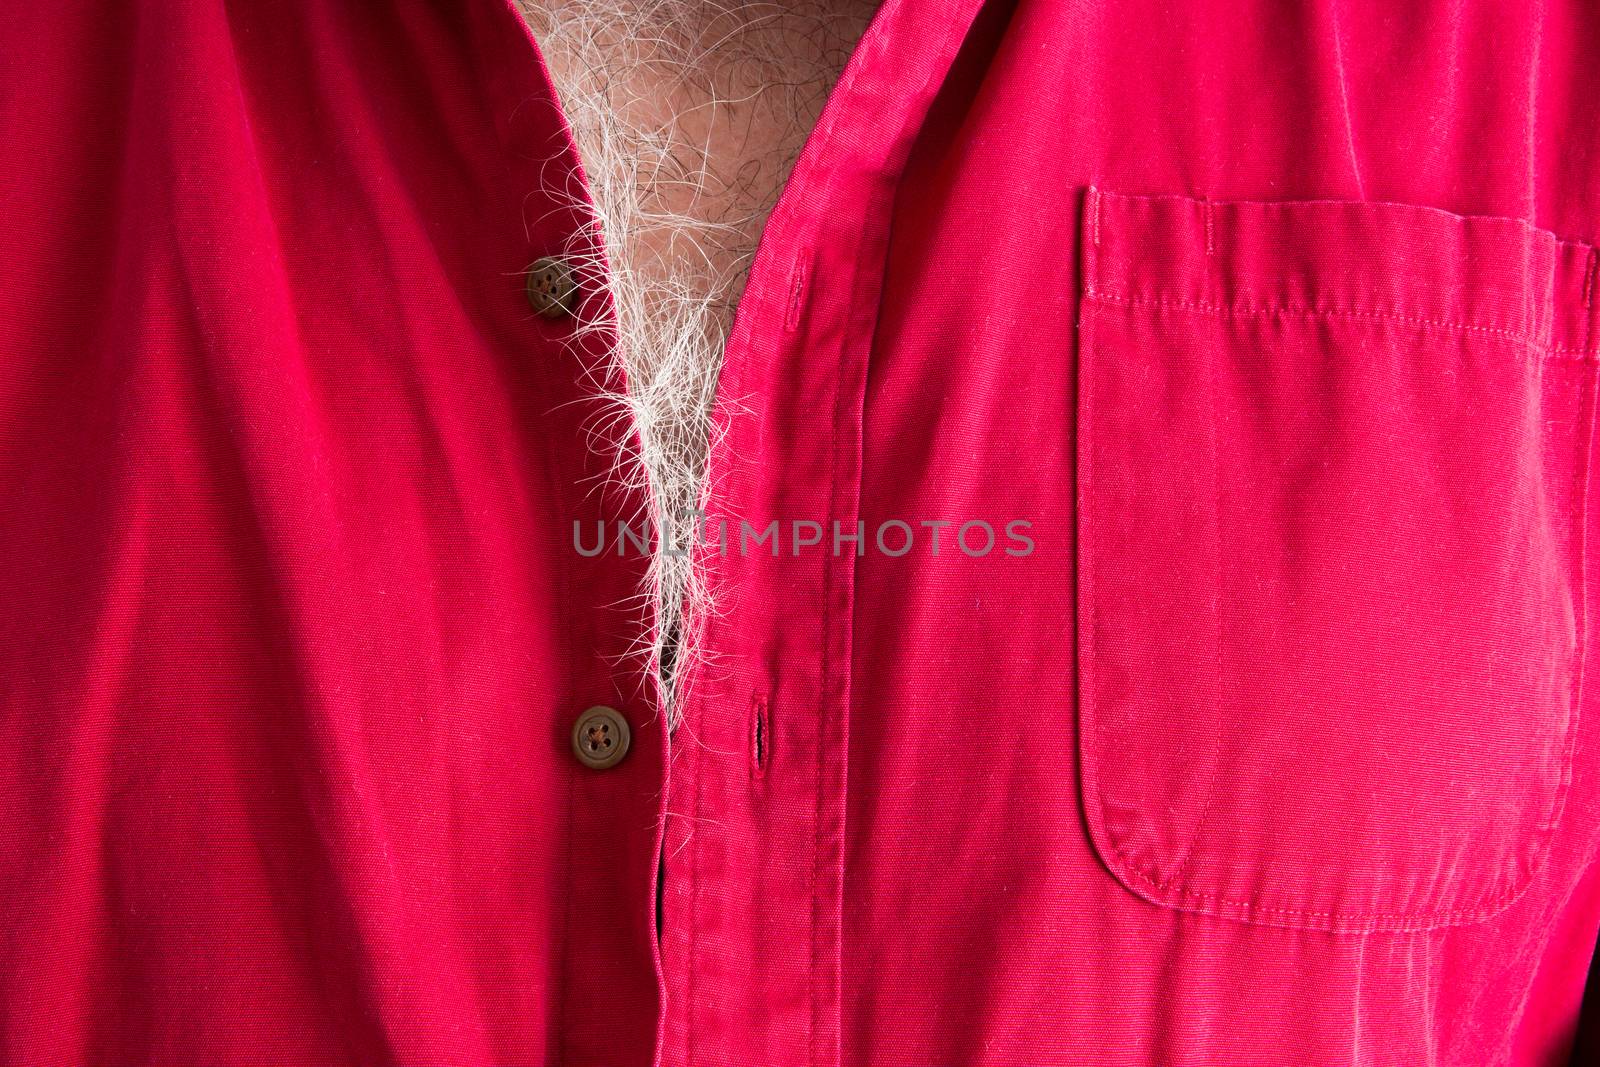 Signs of aging - grey hairs on a male chest in a close up view peeking out of the collar of his red shirt, unrecognizable